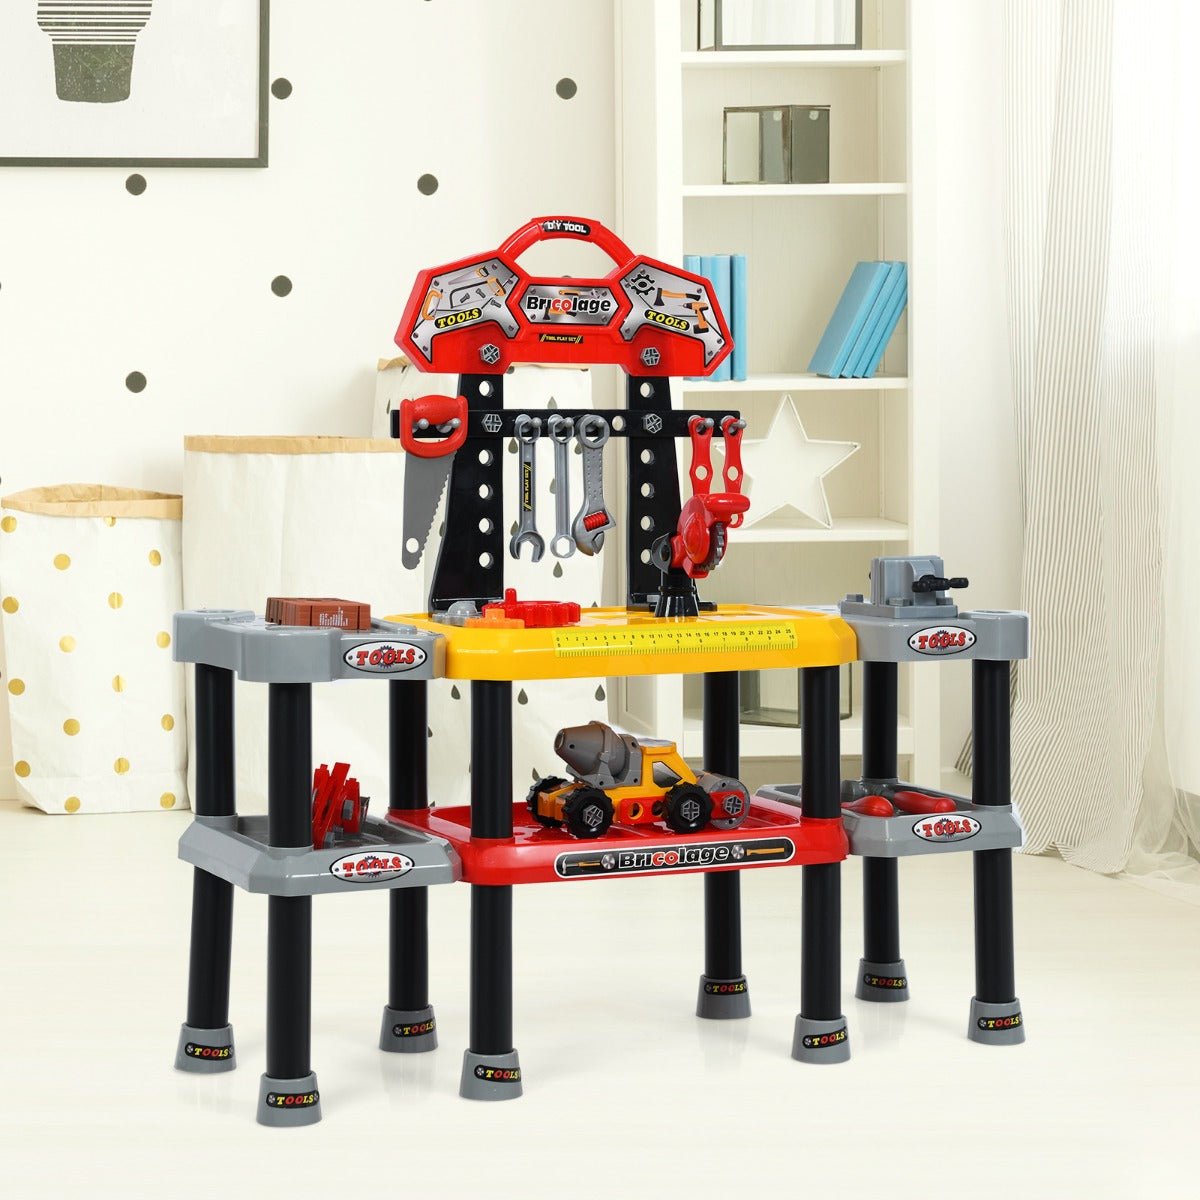 Explore, Create, Build: 121 PCS Toy Tool Set with Double-Tier Action